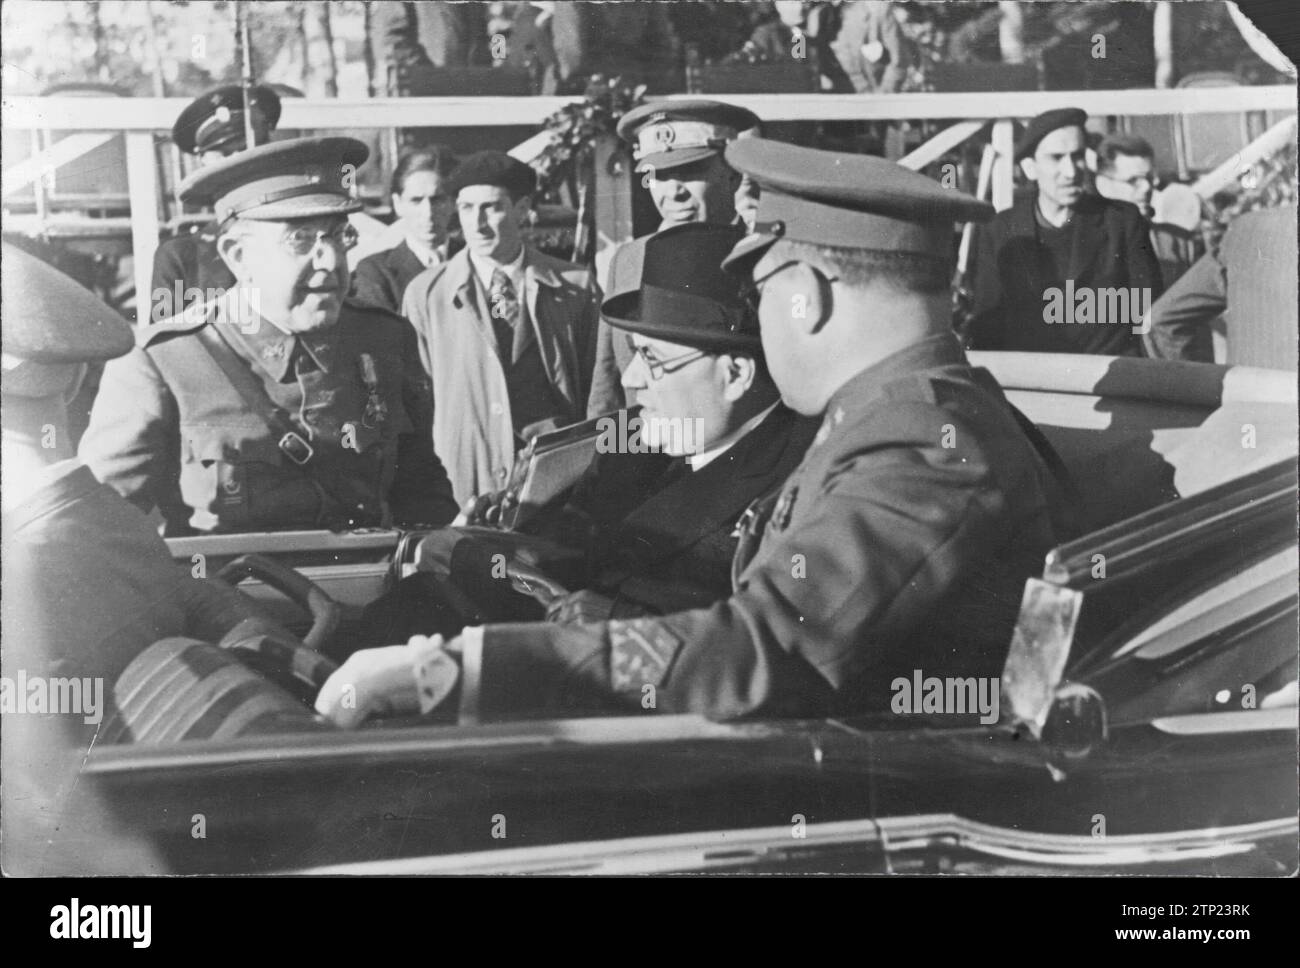 12/31/1937. The president of the Council, Dr. Negrín, talking with General Riquelme Moments before the International parade. Credit: Album / Archivo ABC Stock Photo